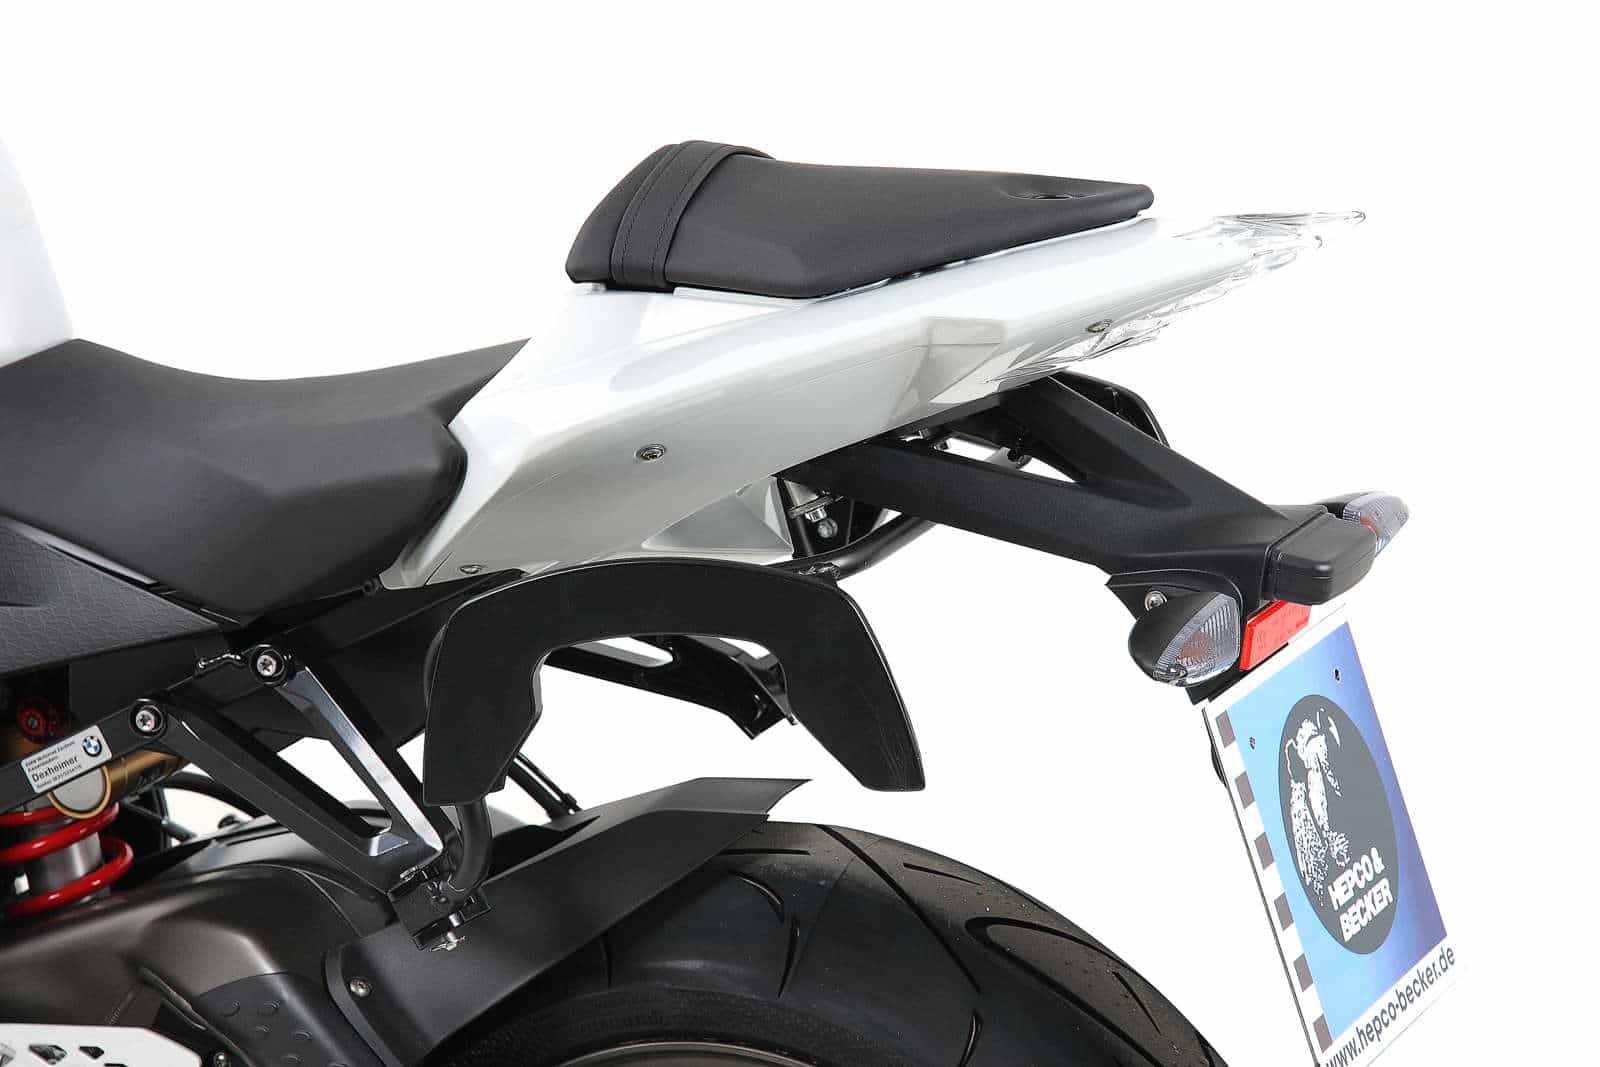 C-Bow sidecarrier for BMW S 1000 RR (2009-2011) (pillion seat not usable)